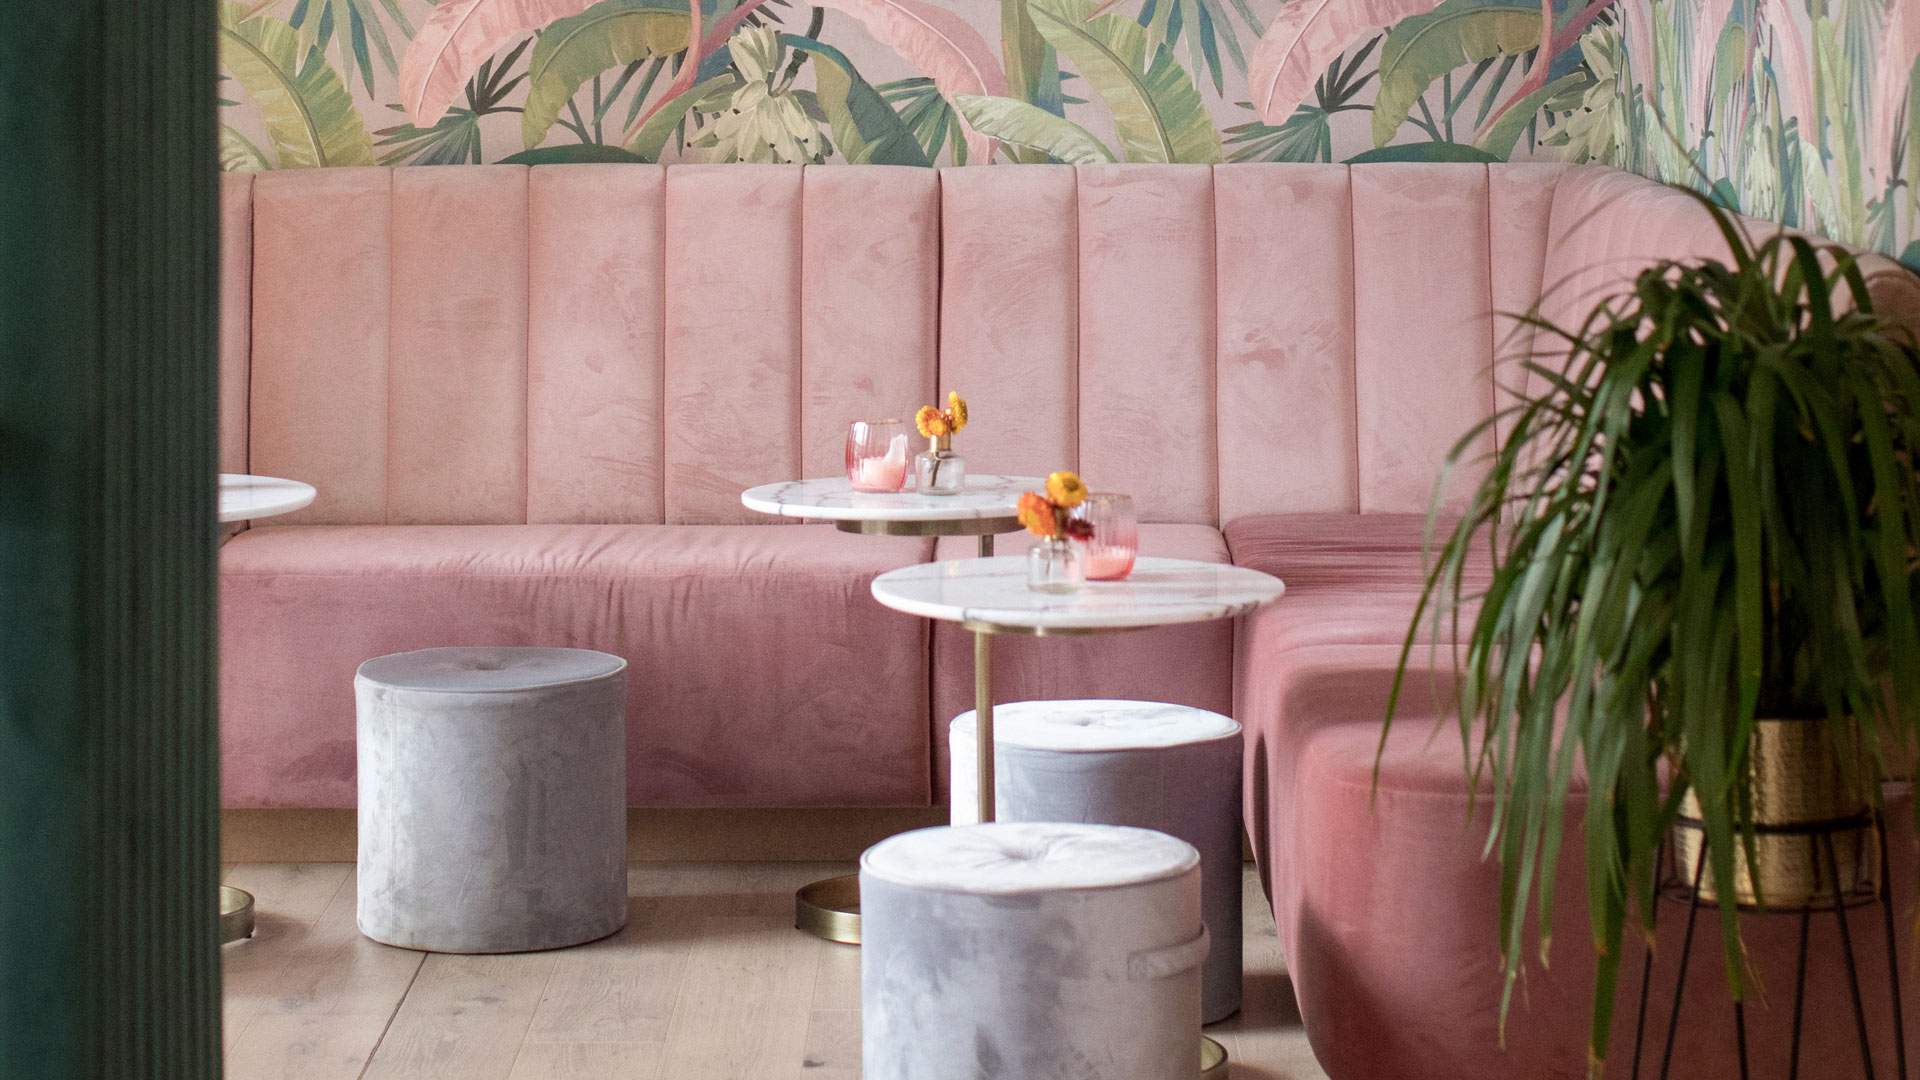 Maybe Sammy Is the New 50s-Inspired Cocktail Bar from One of Australia's Best Bartenders